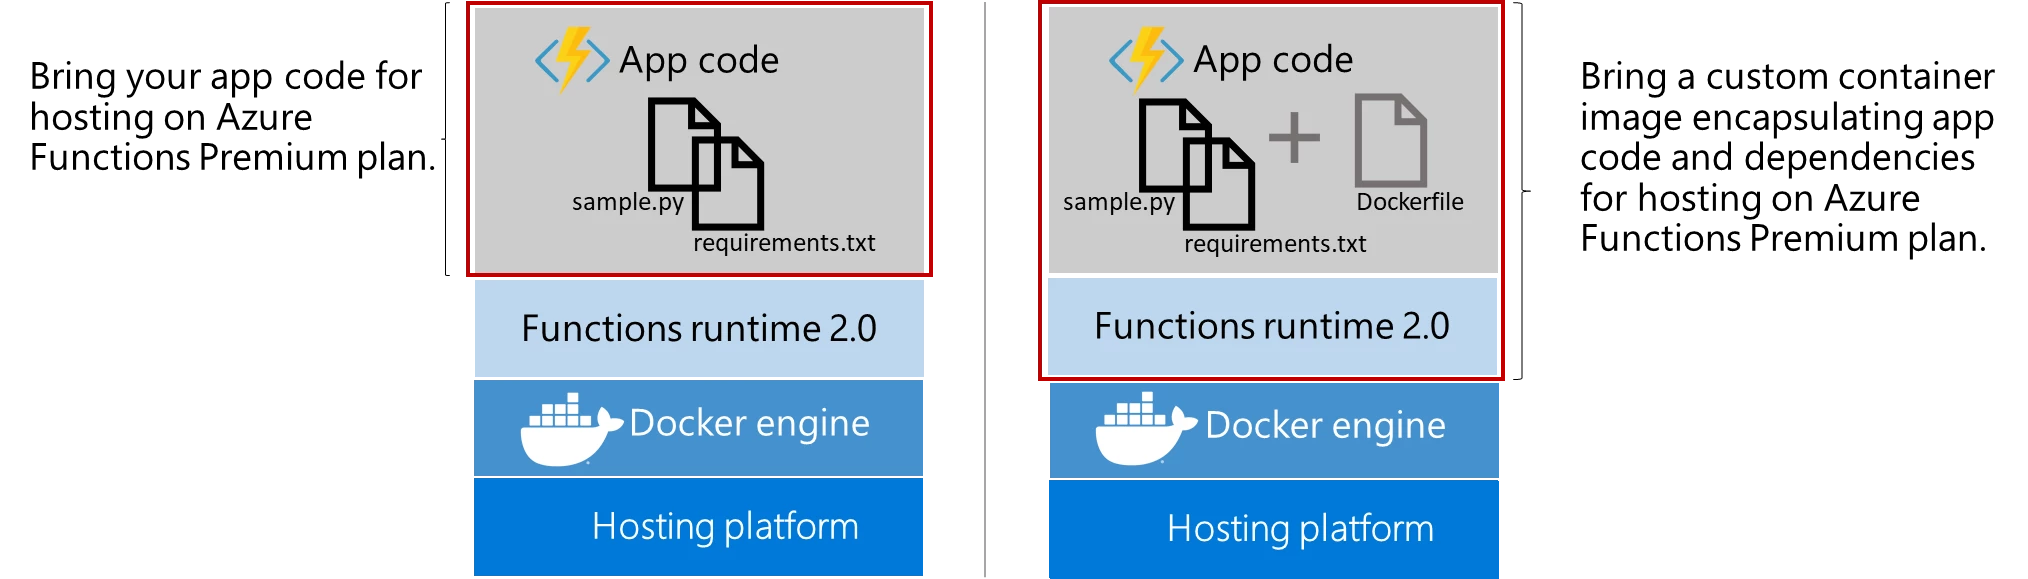 Azure Functions Premium plan hosting for code or containers